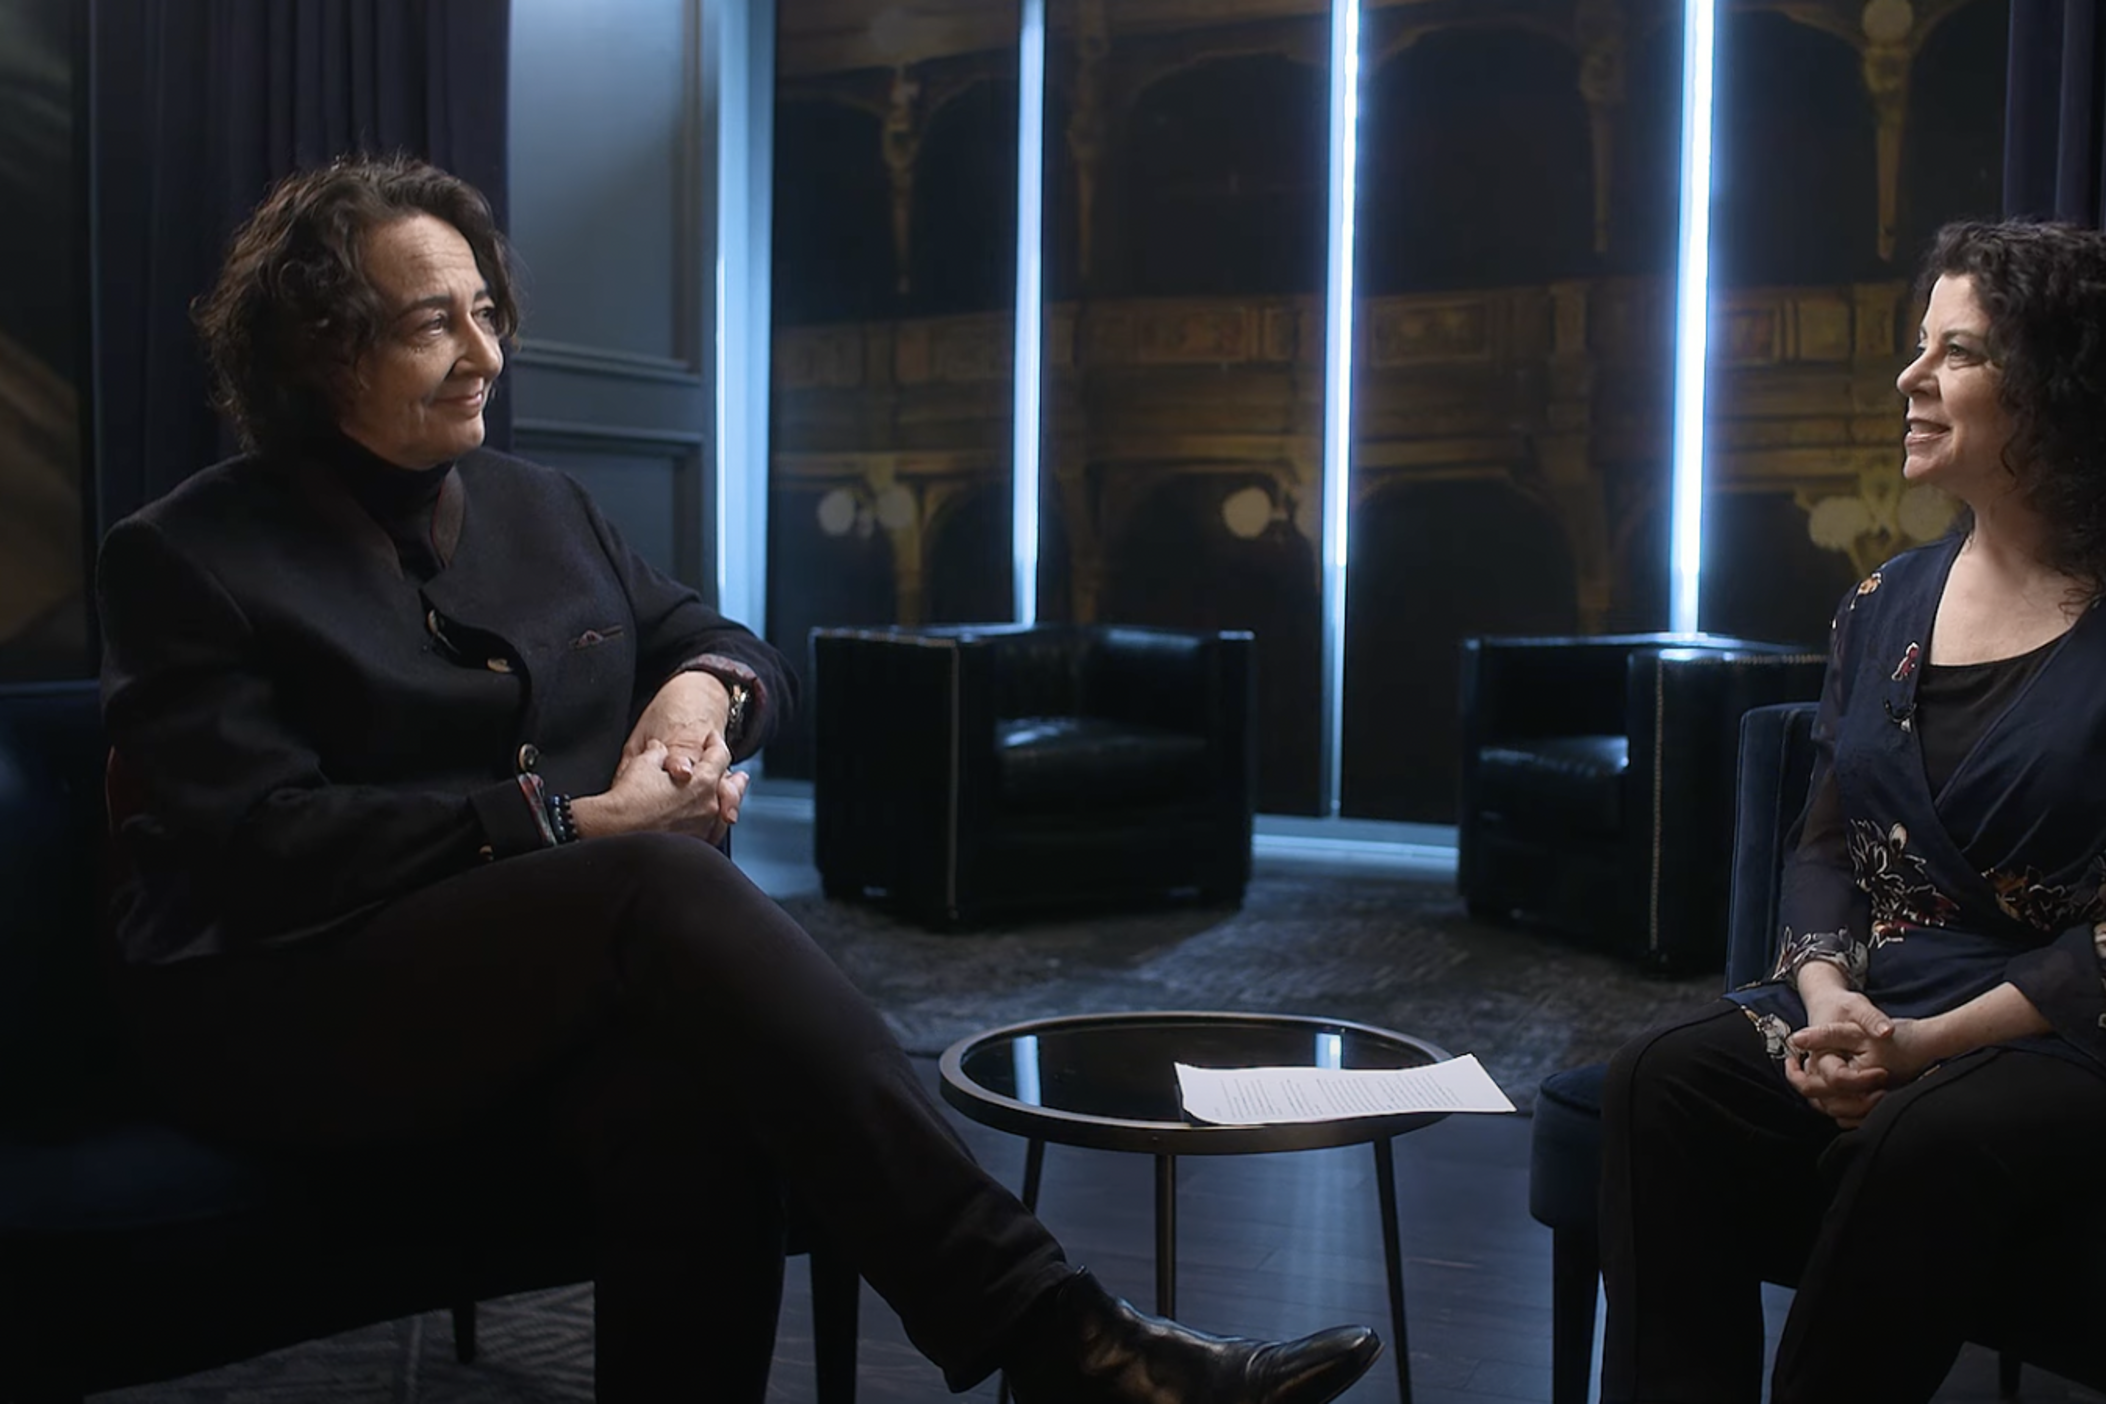 Atlanta Symphony Orchestra Music Director Nathalie Stutzmann speaks with GPB's Sarah Zaslaw about her second season with the ensemble and the documentary, 'My Bolero,' which airs on GPB TV Sunday, March 17 at 5 p.m.